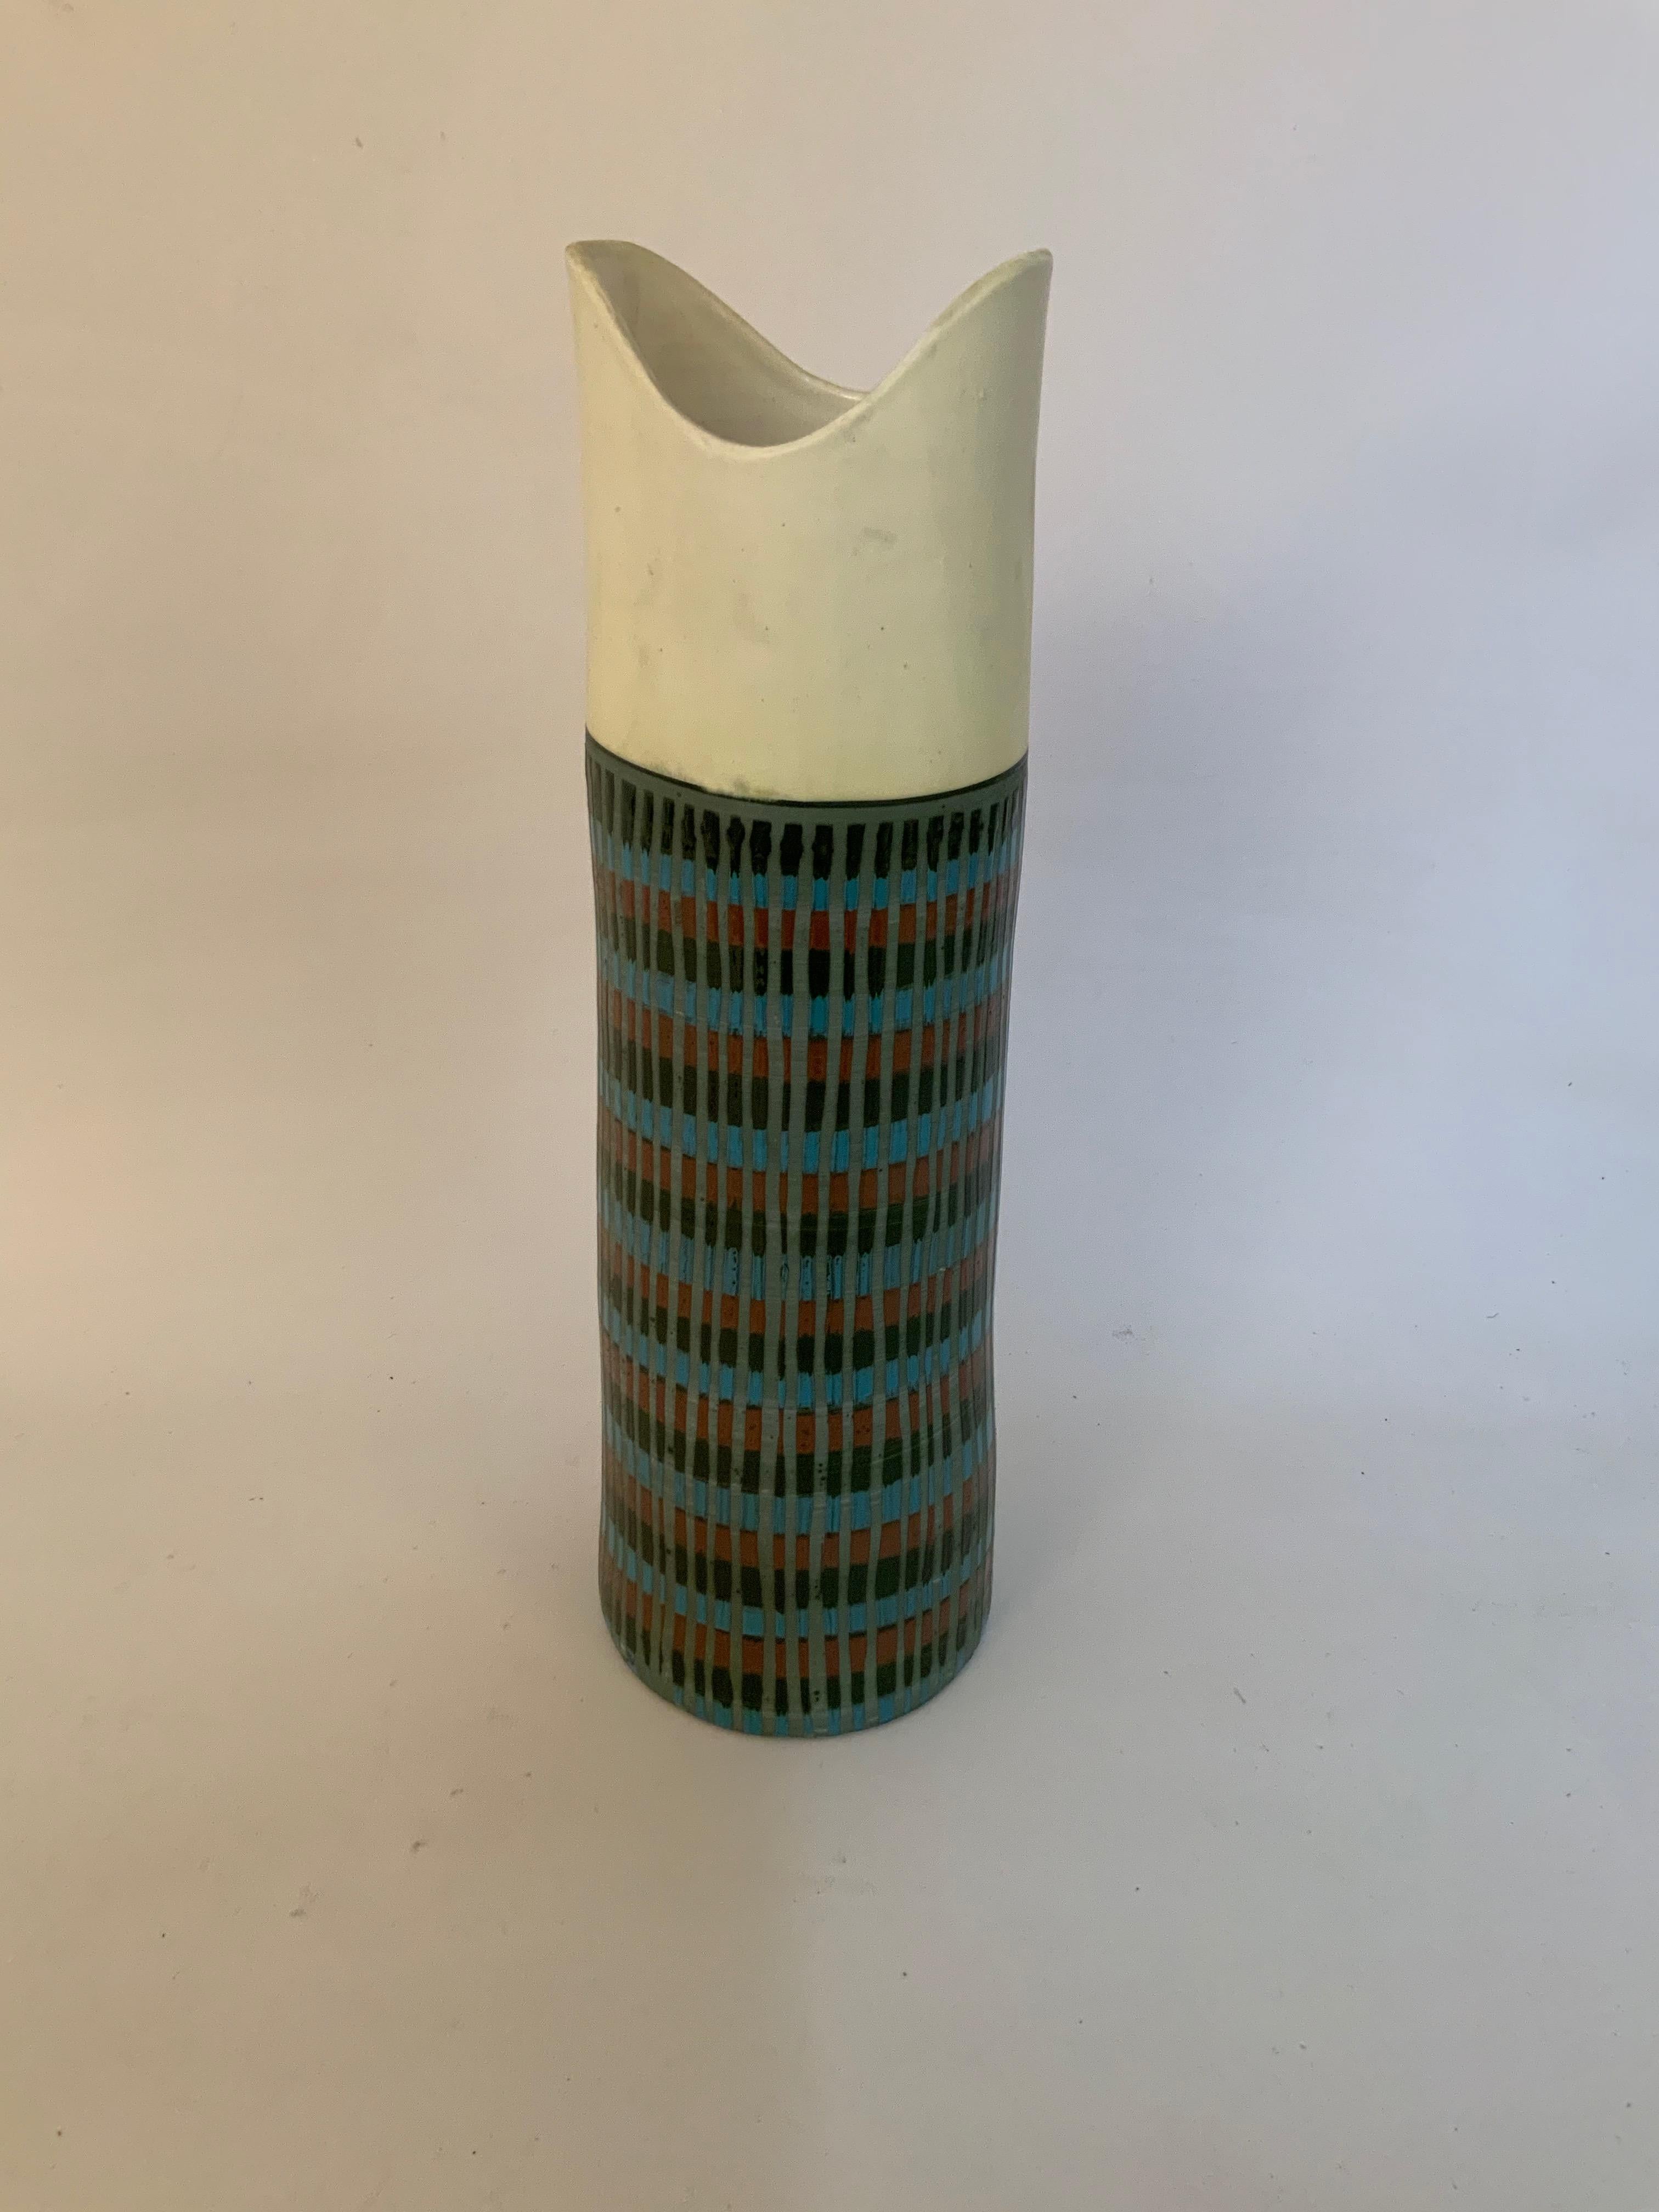 Tall Bitossi Italian pottery vase, circa 1950-1960. Signed on the bottom, Italy, 849. Egg shell white 'V' cut opening. Terracotta, turquoise, black ring decoration streaked with gray. Very good condition with no visible chips, cracks, crazing,